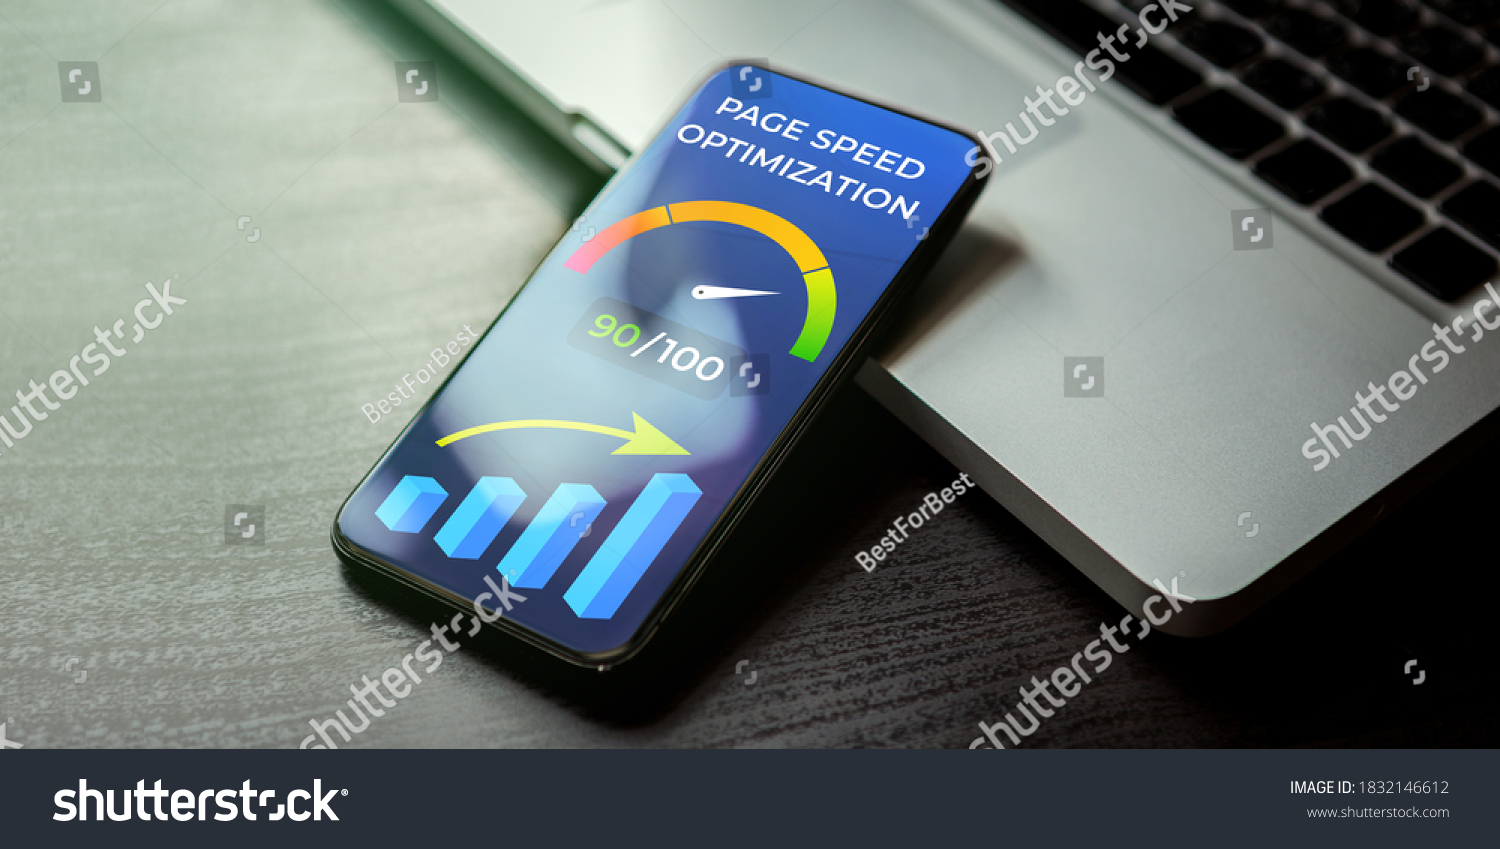 Mobile Page Speed Optimization concept. Website Page Speed Loading Time image for internet SEO. Mobile phone lying on a wooden table next to the laptop and on the screen accelerometer with high values #1832146612